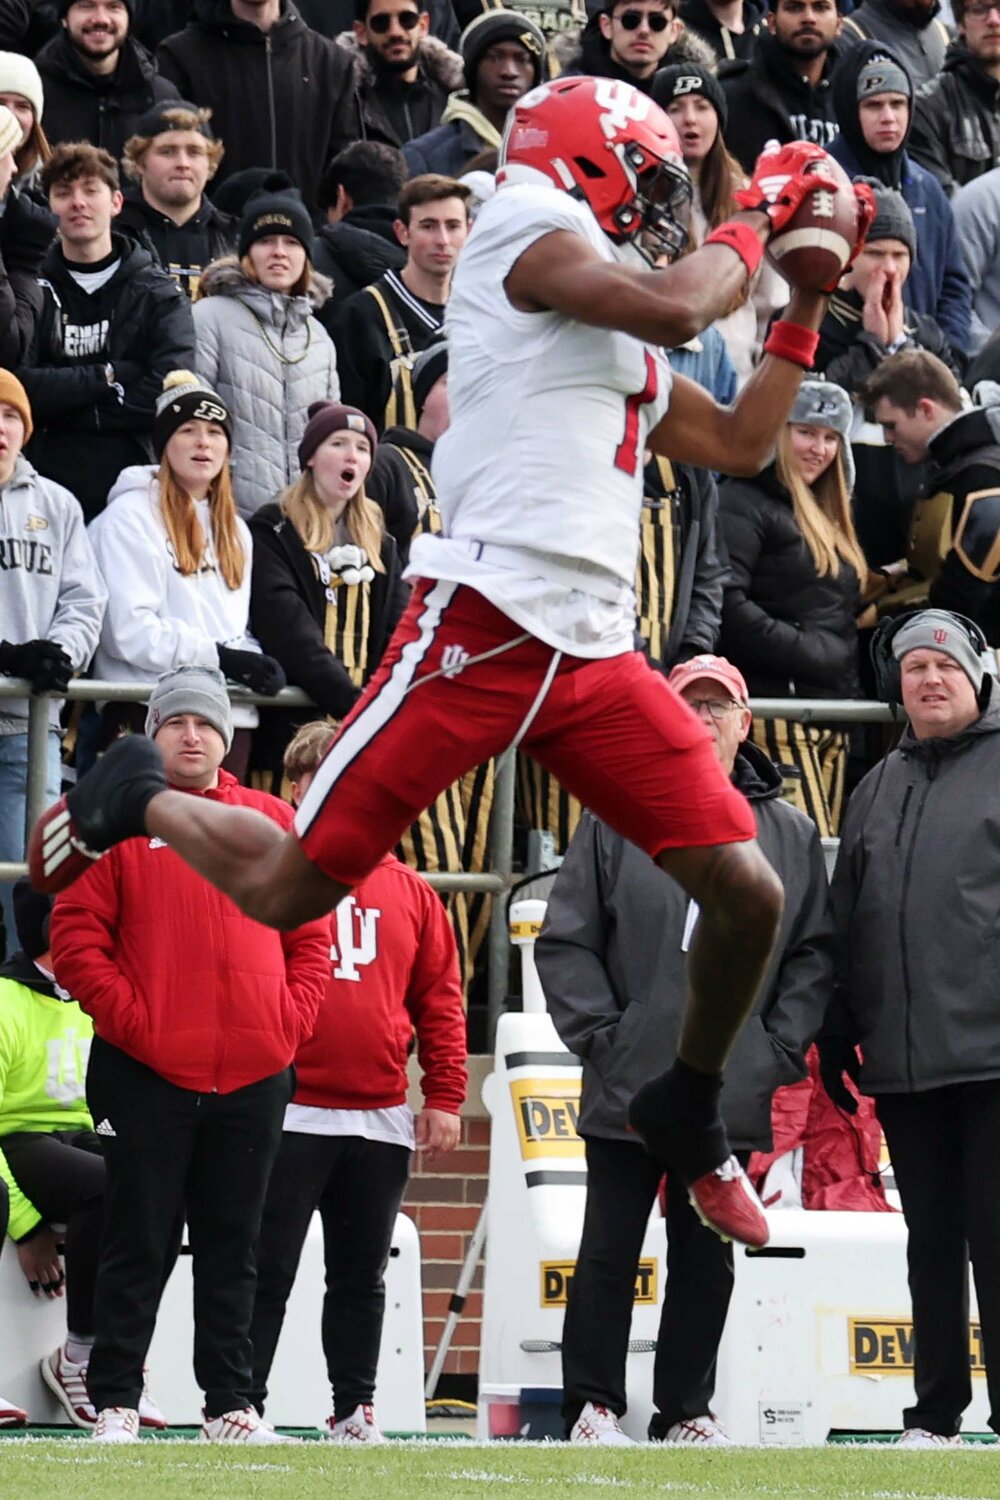 Donaven McCulley of Indiana - catching pass, gain of 5 yards